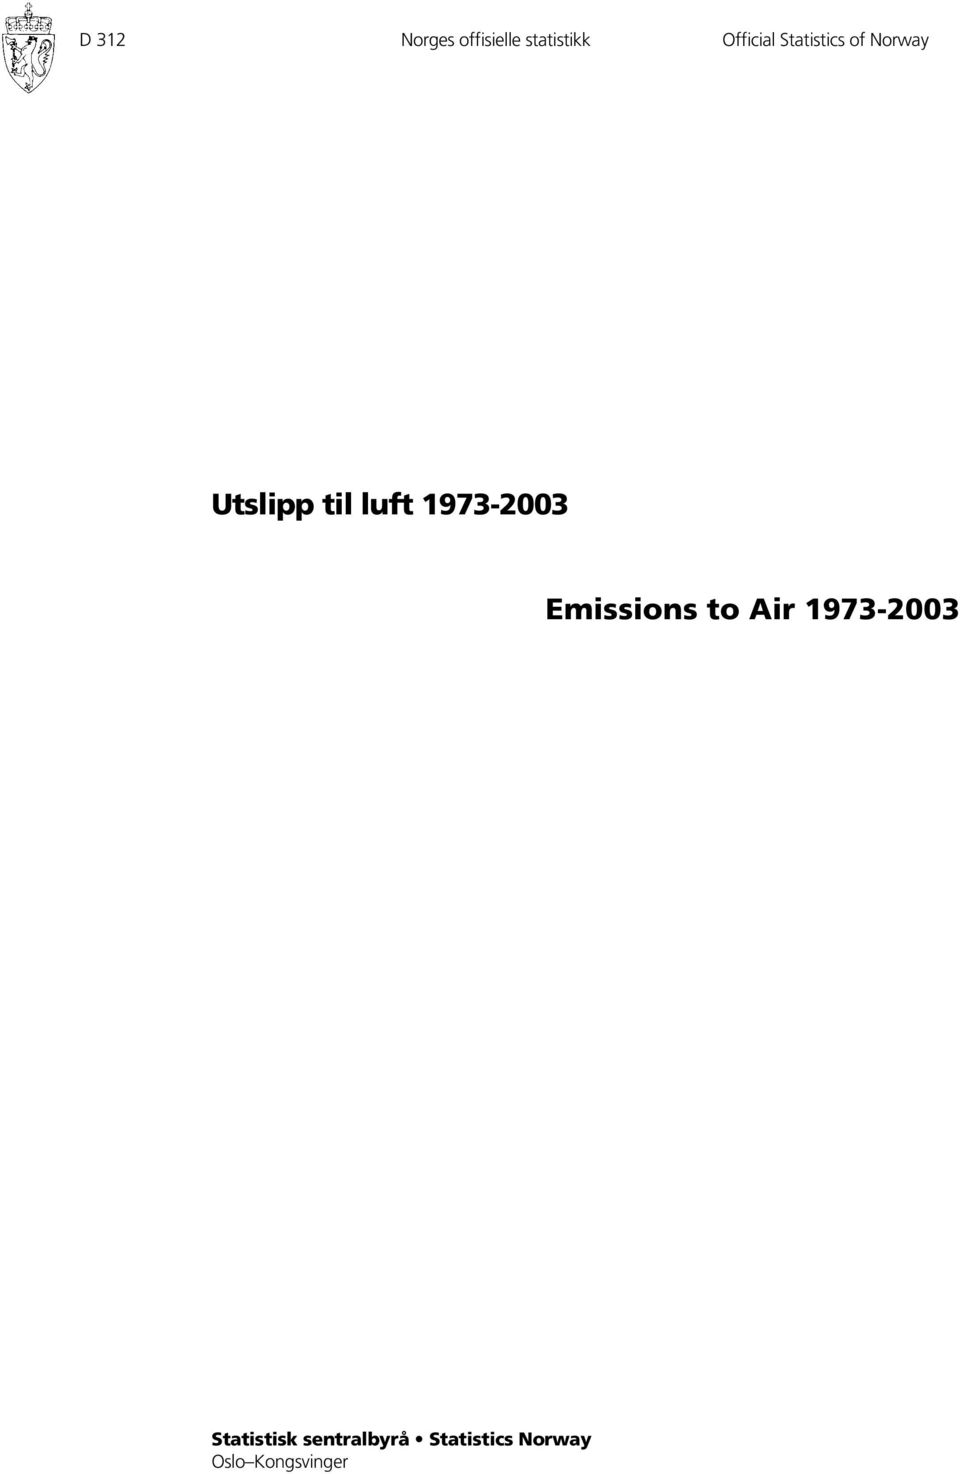 1973-2003 Emissions to Air 1973-2003